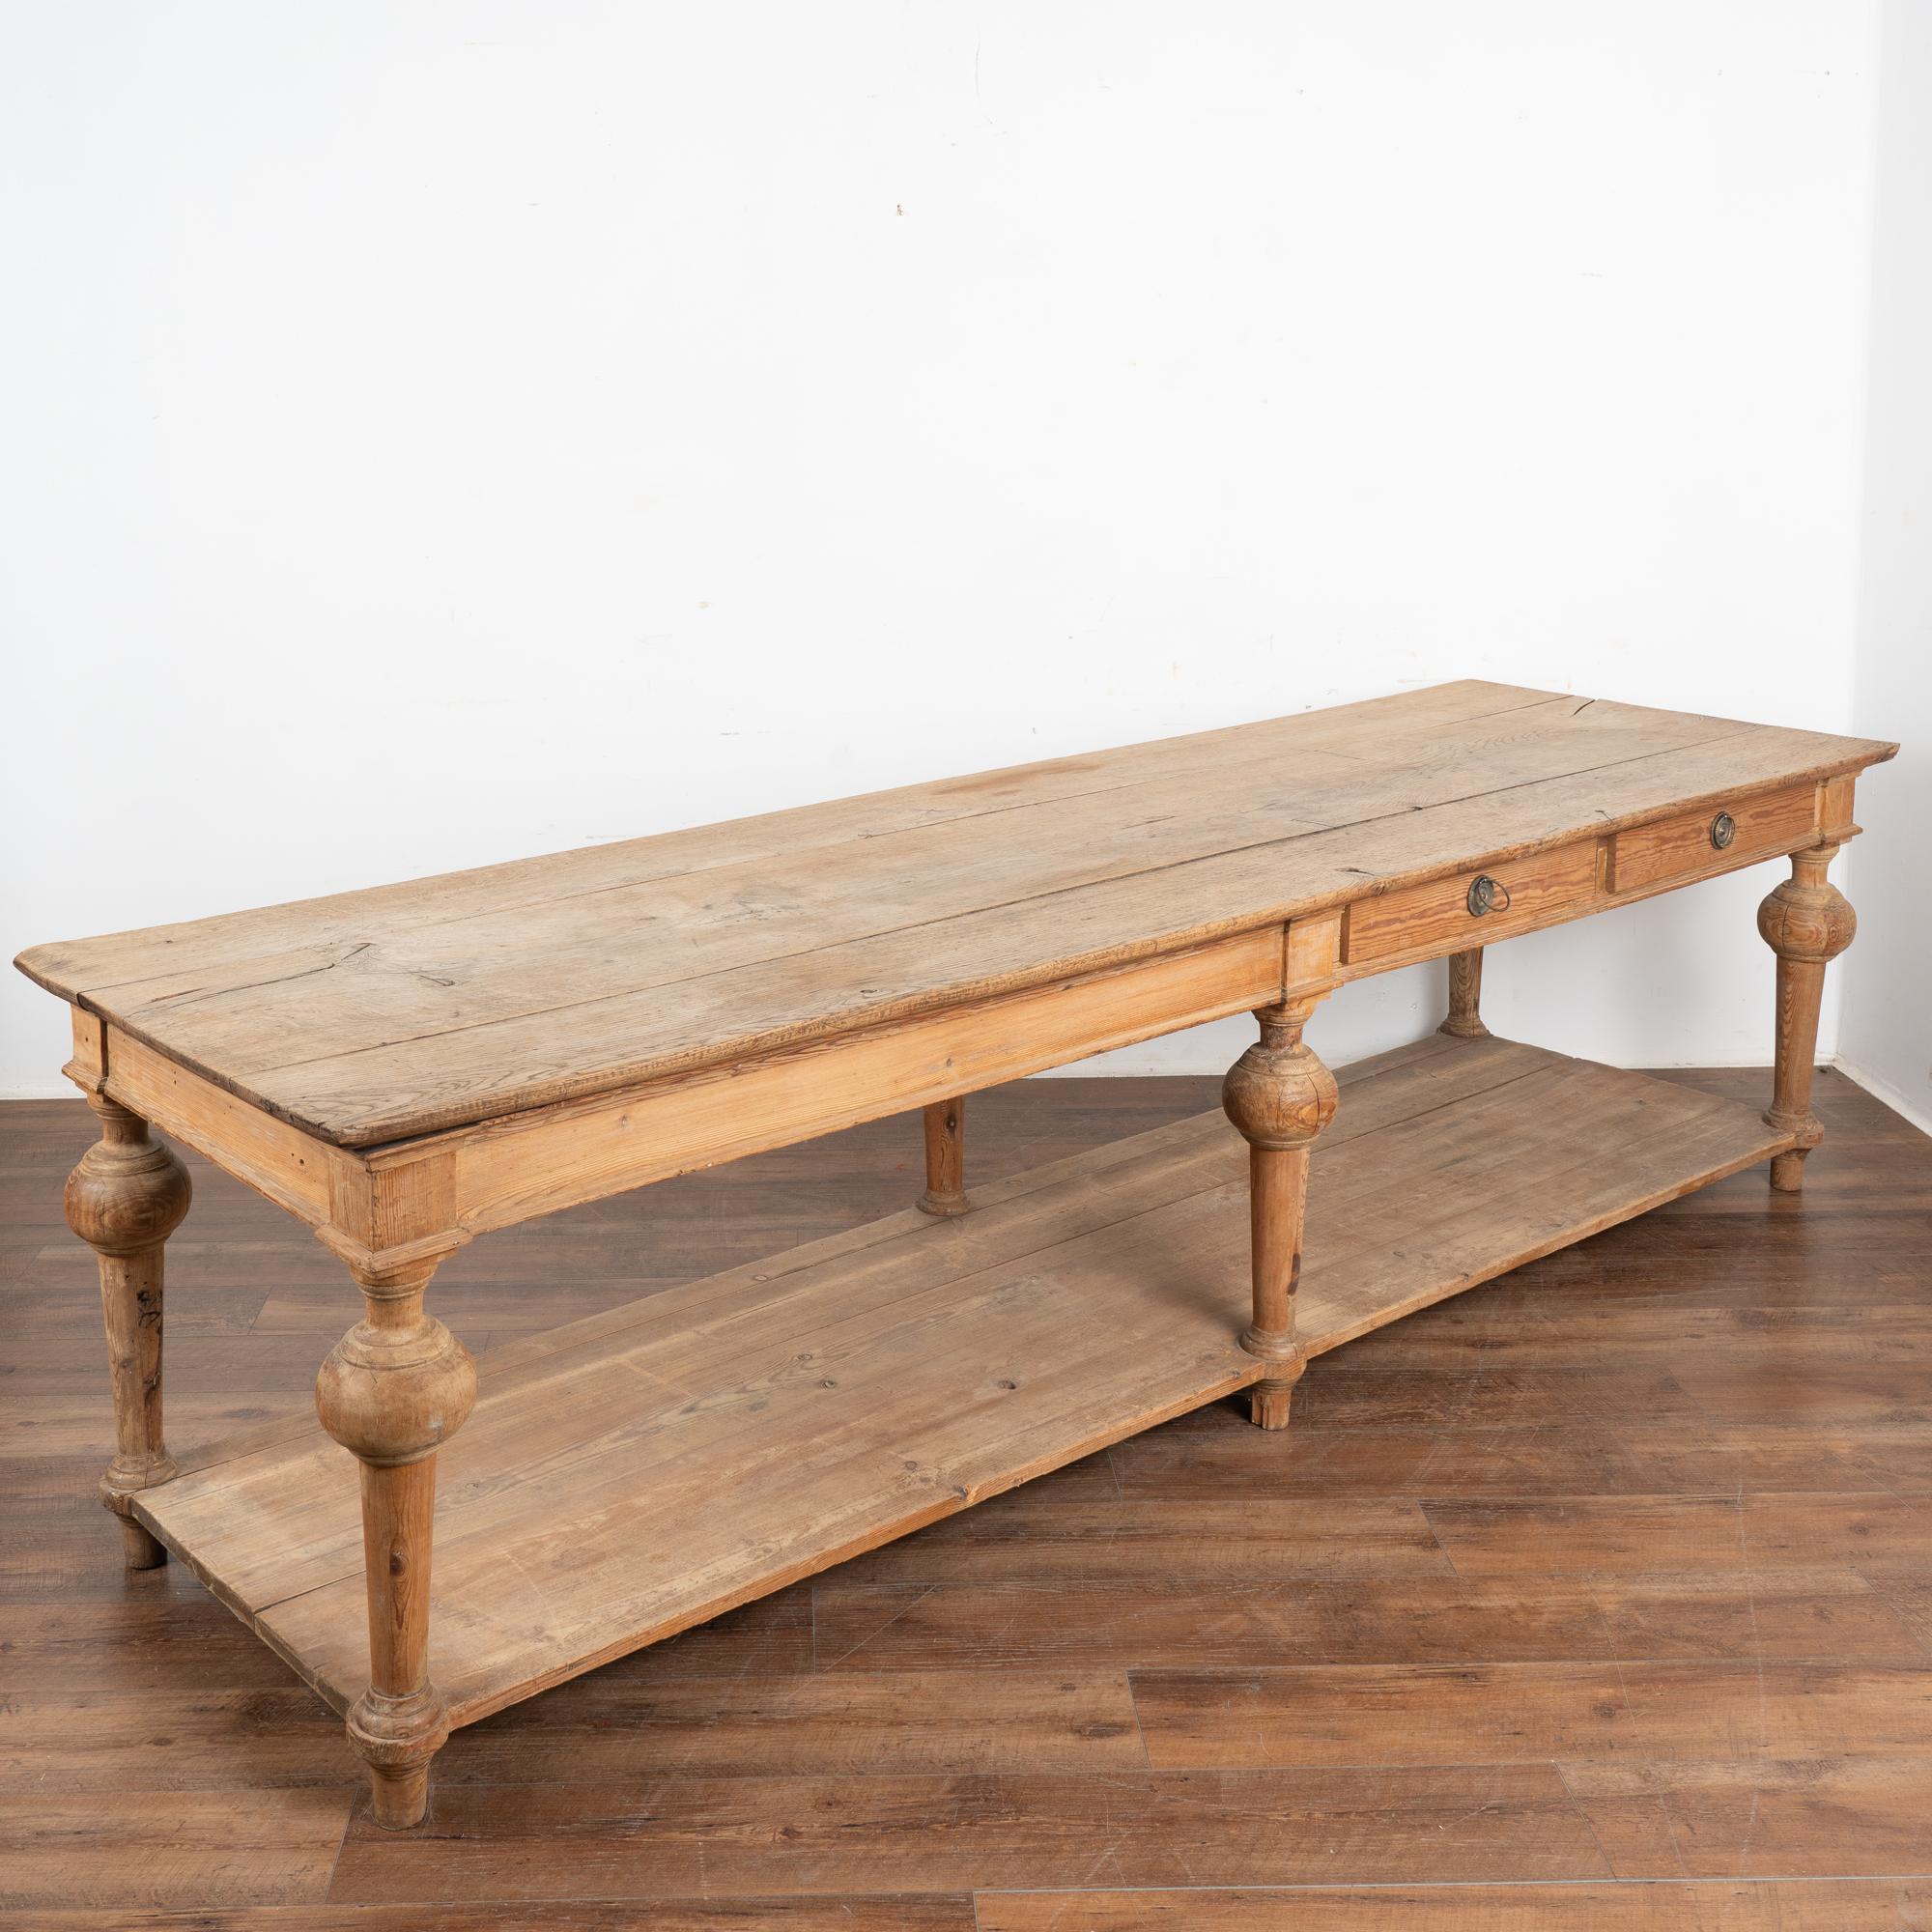 Impressive in size at over 9' long, this French oak drapers table is visually stunning with its six turned legs, two drawers and a lower shelf.
Three planks comprise the top with generations of use seen in every crack, stain and separation of the